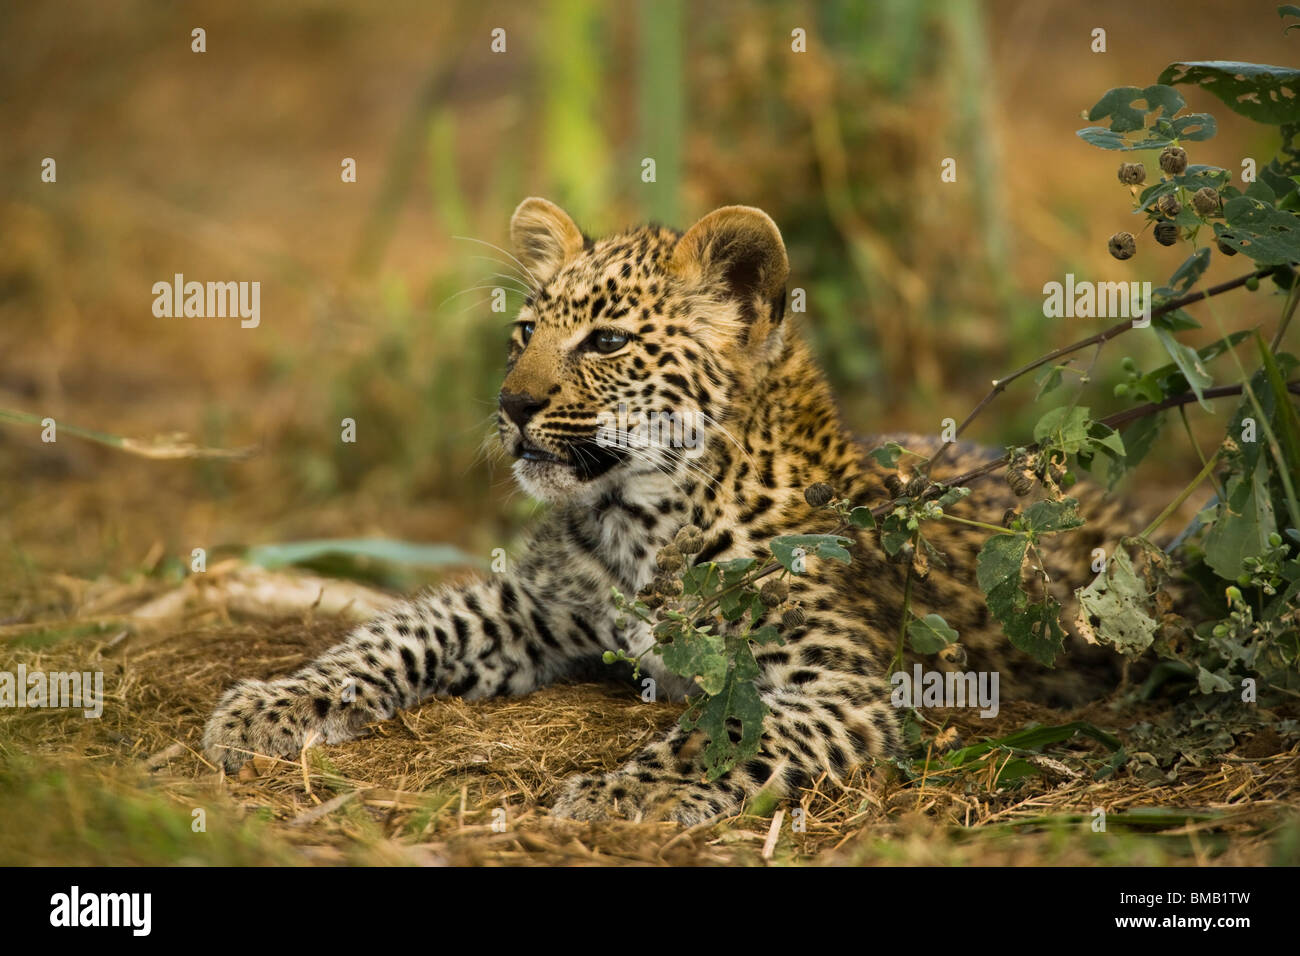 Alert cute baby Leopard cub lying down head raised looking soft background shallow depth of field Stock Photo